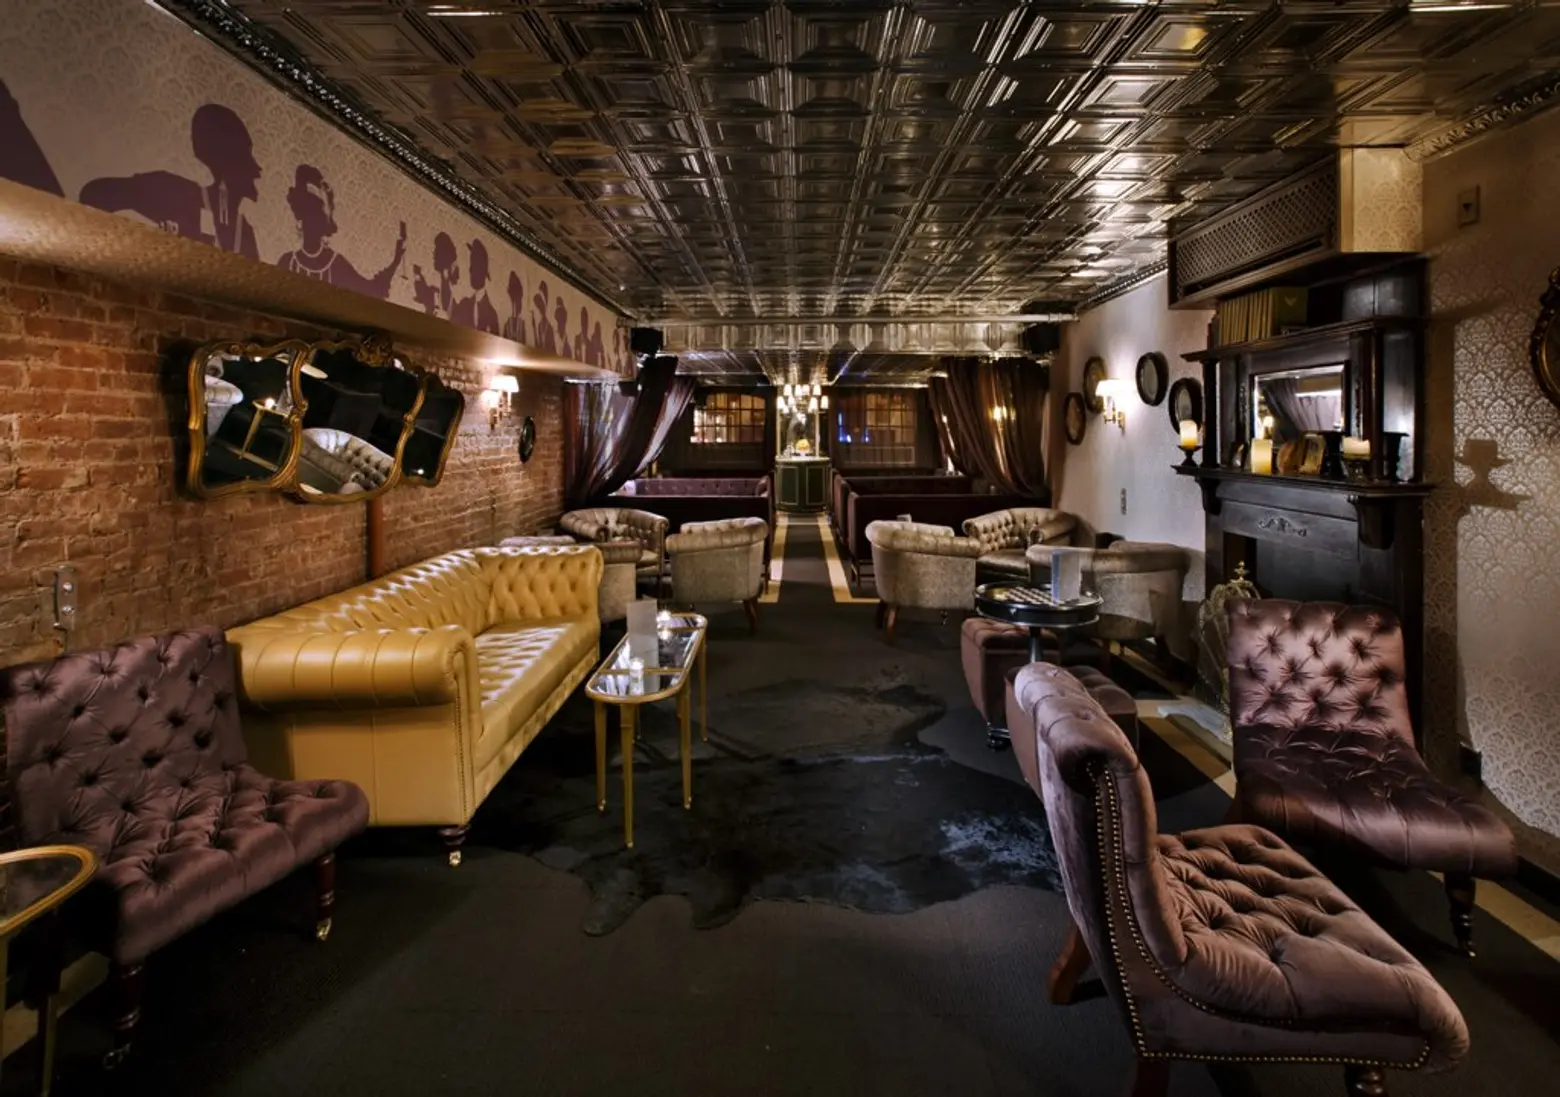 5 Prohibition-Style Speakeasies to Transport You Back to the Gilded Age